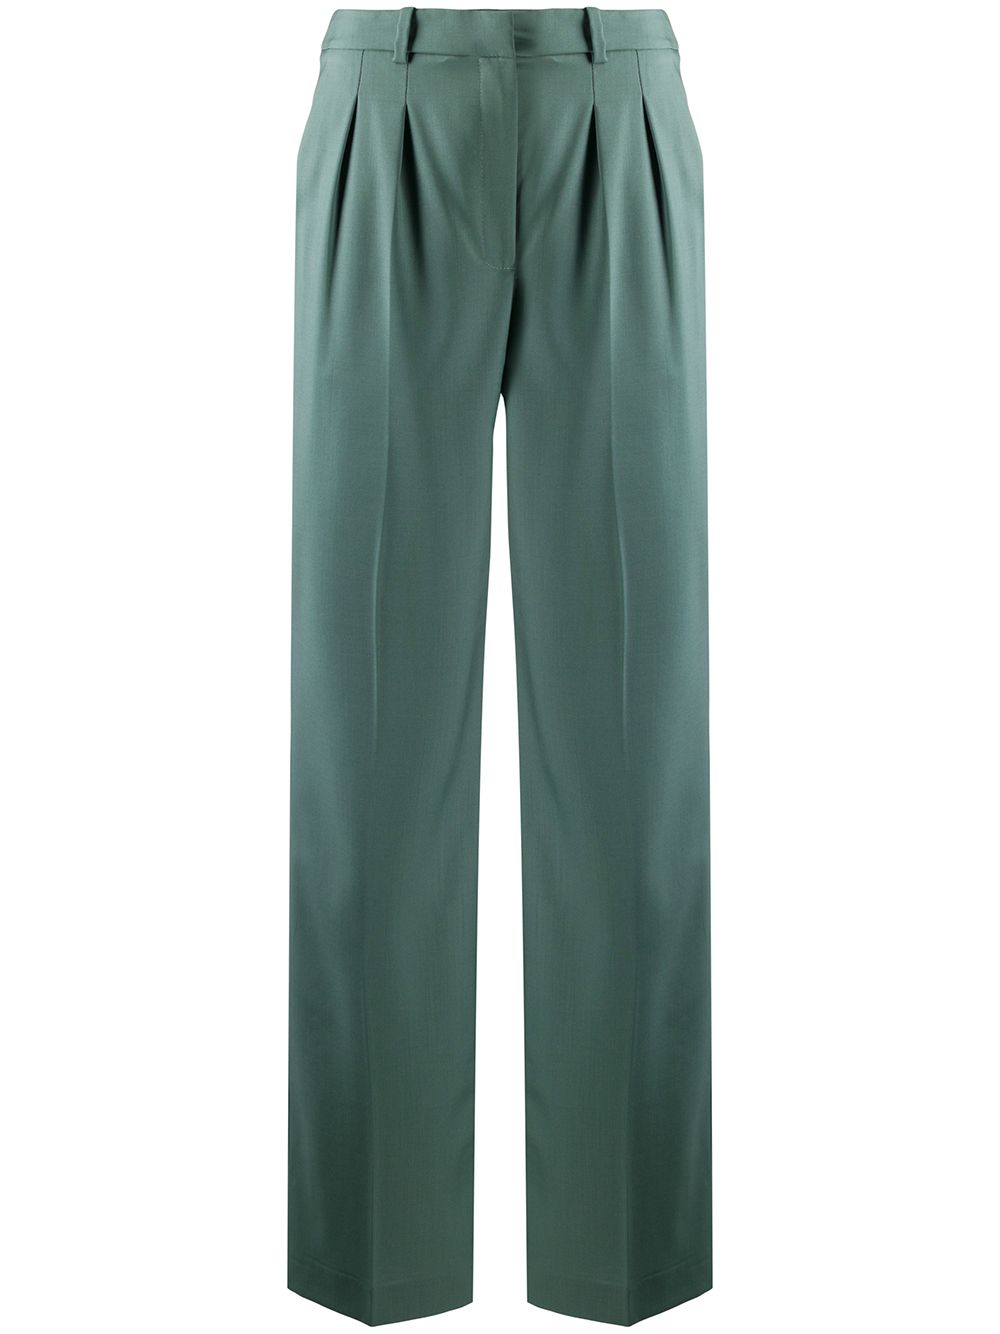 Loulou Studio tailored wool trousers - Green von Loulou Studio